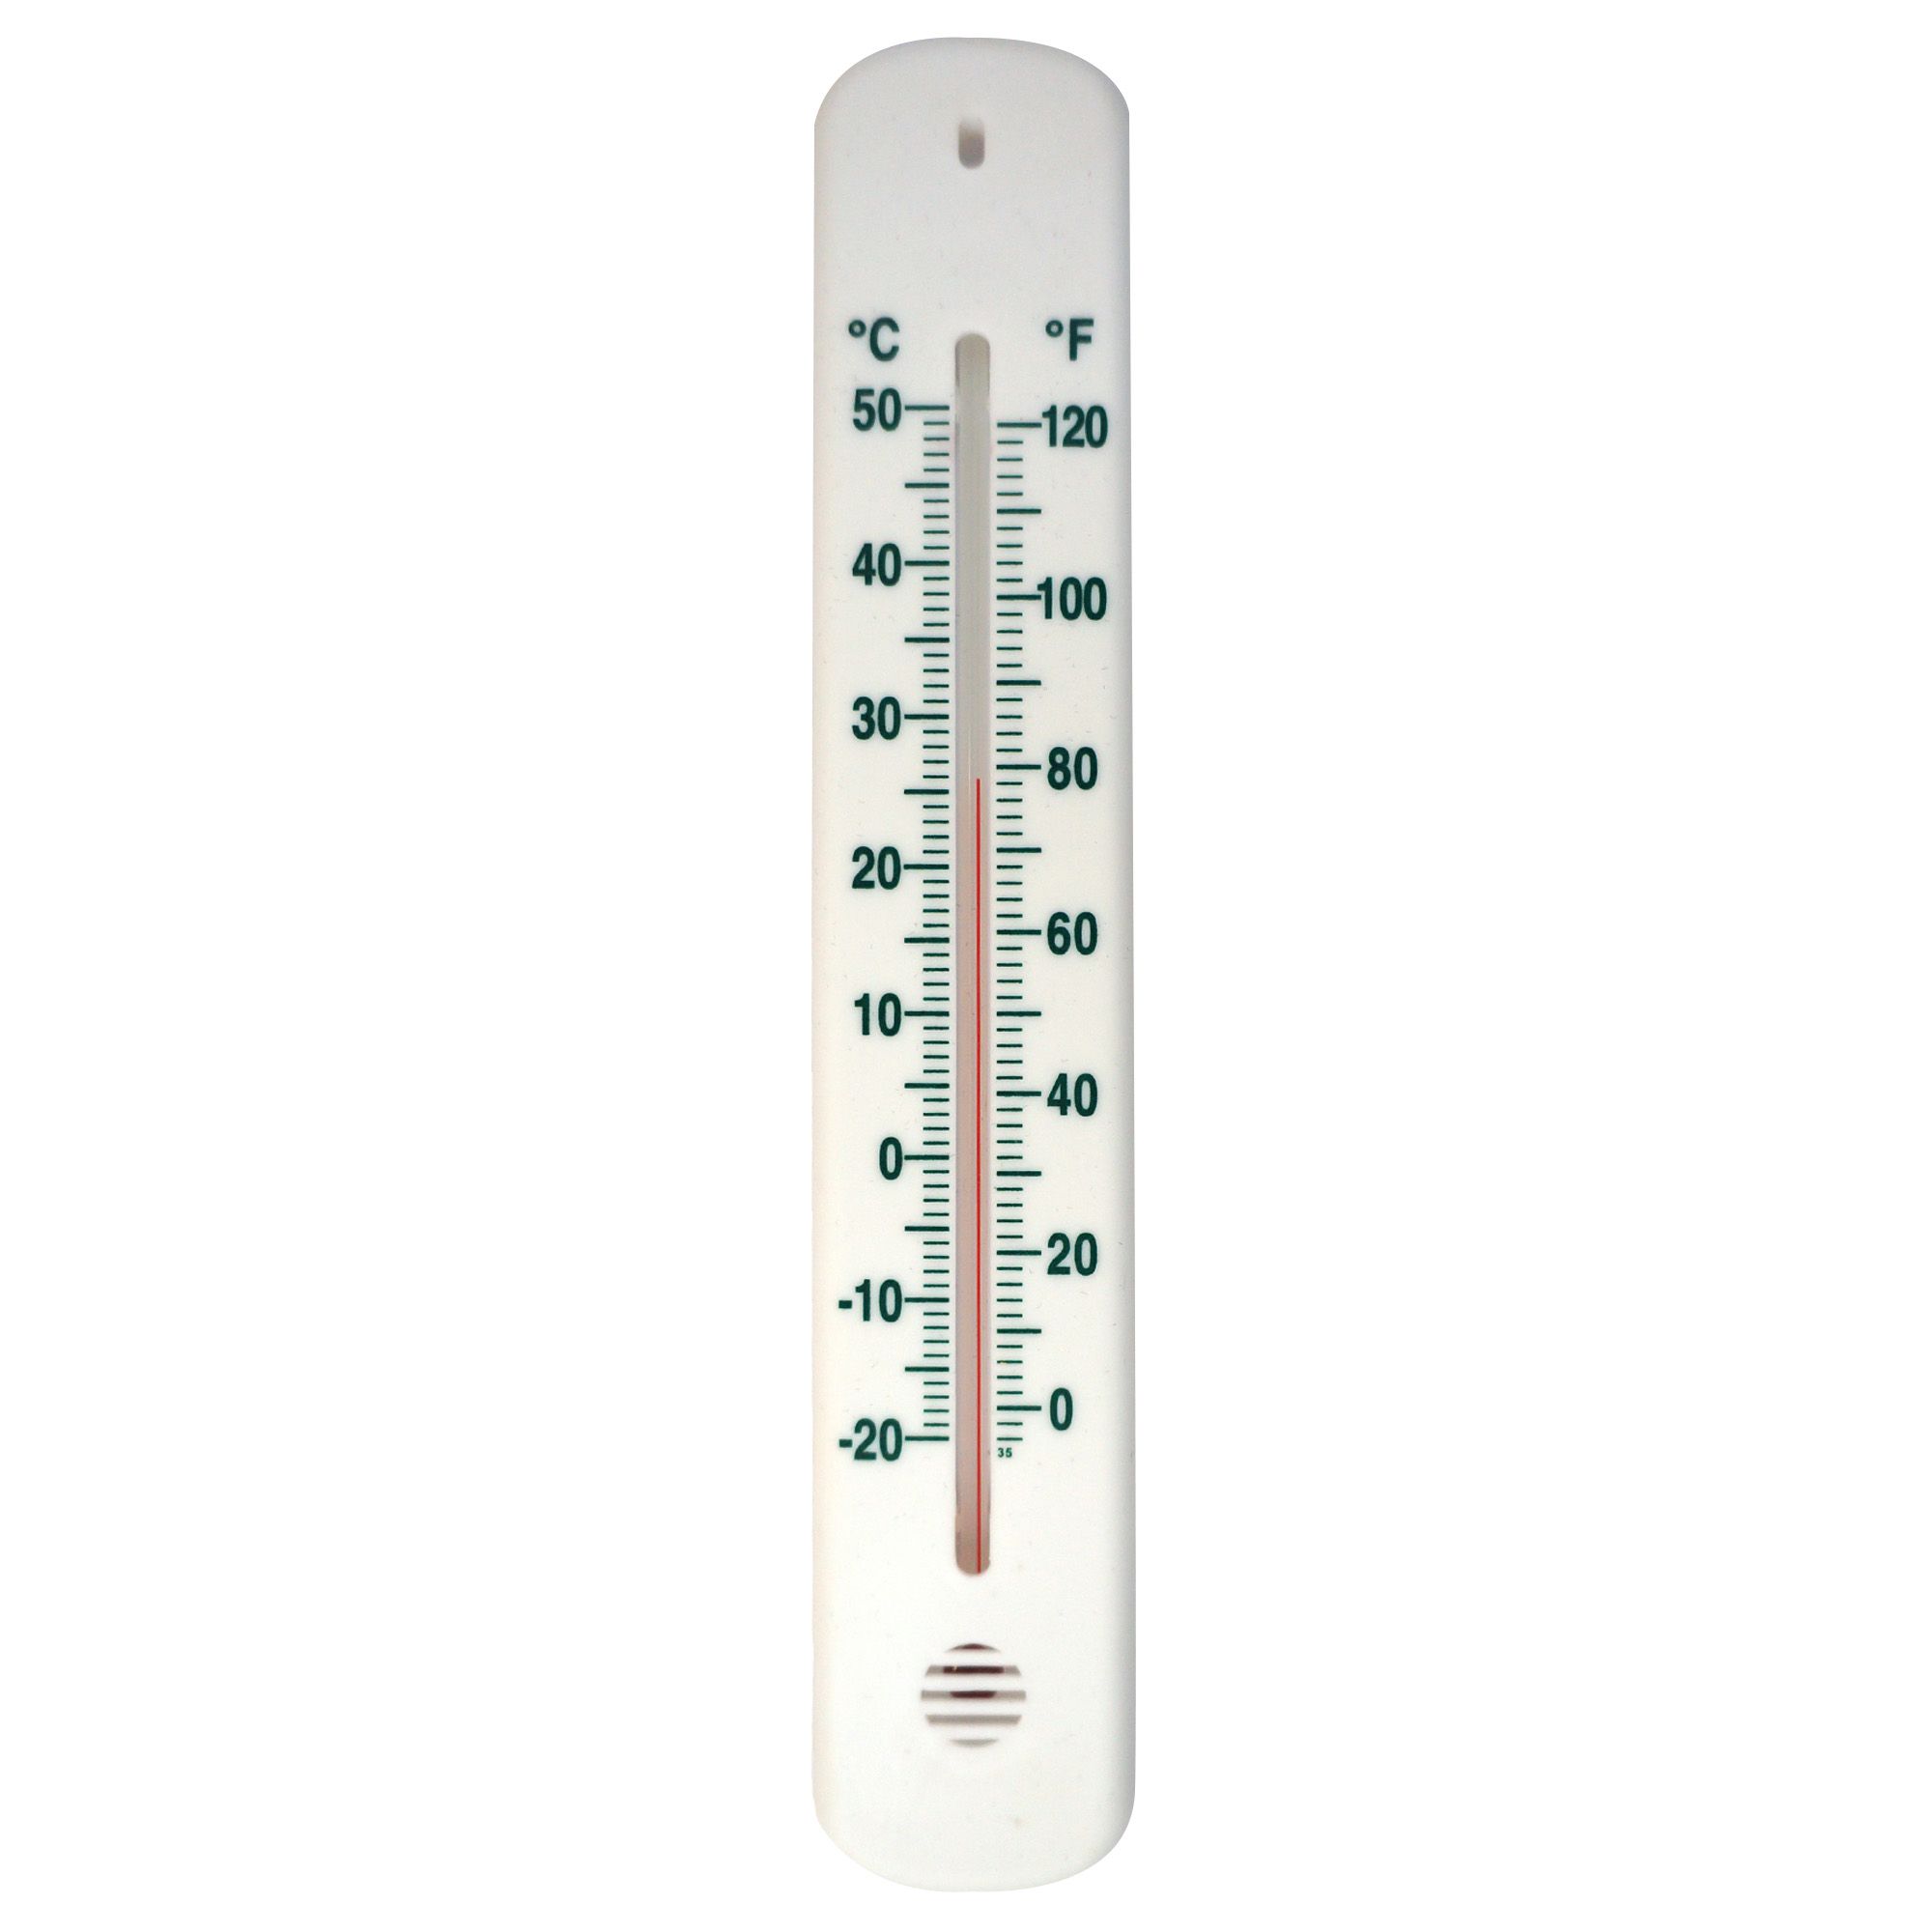 https://media.diy.com/is/image/Kingfisher/verve-wall-thermometer~5397007144499_02c_bq?$MOB_PREV$&$width=618&$height=618